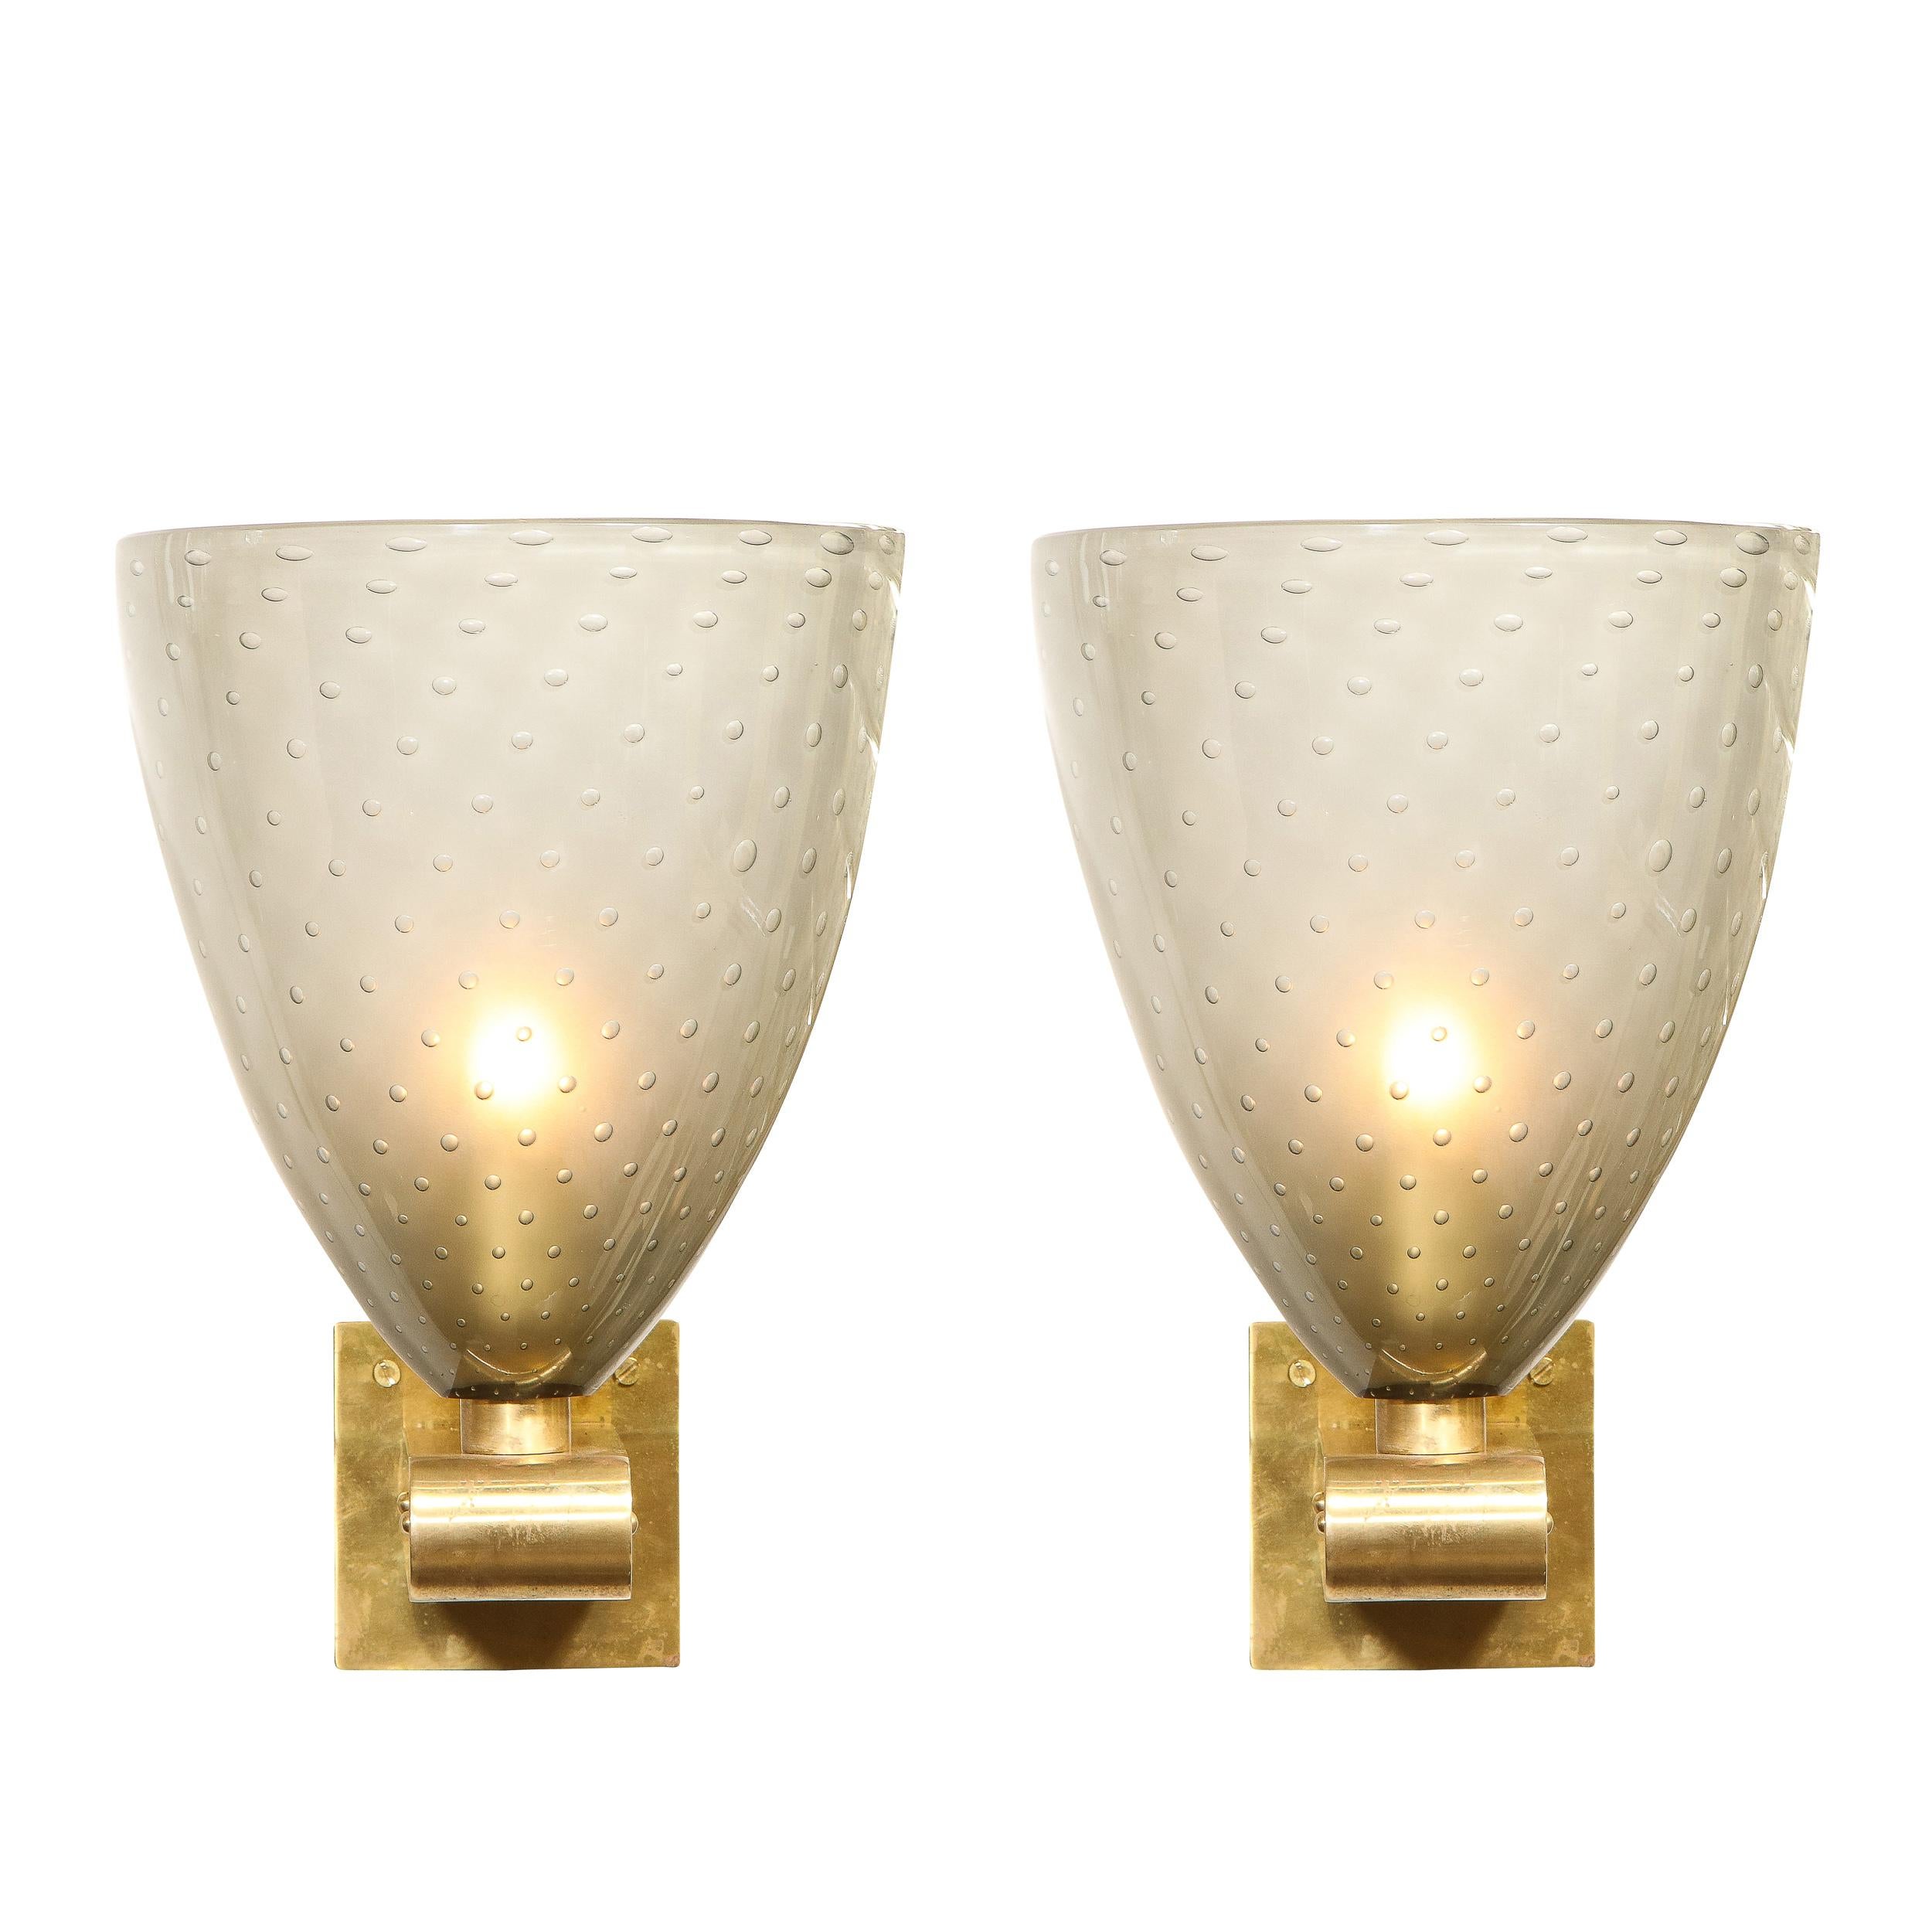 This gorgeous pair of sconces were hand blown in Murano, Italy- the islands off the coast of Venice renowned for centuries for their superlative glass production. They are composed of billowing semi-translucent smoked glass shades replete with an